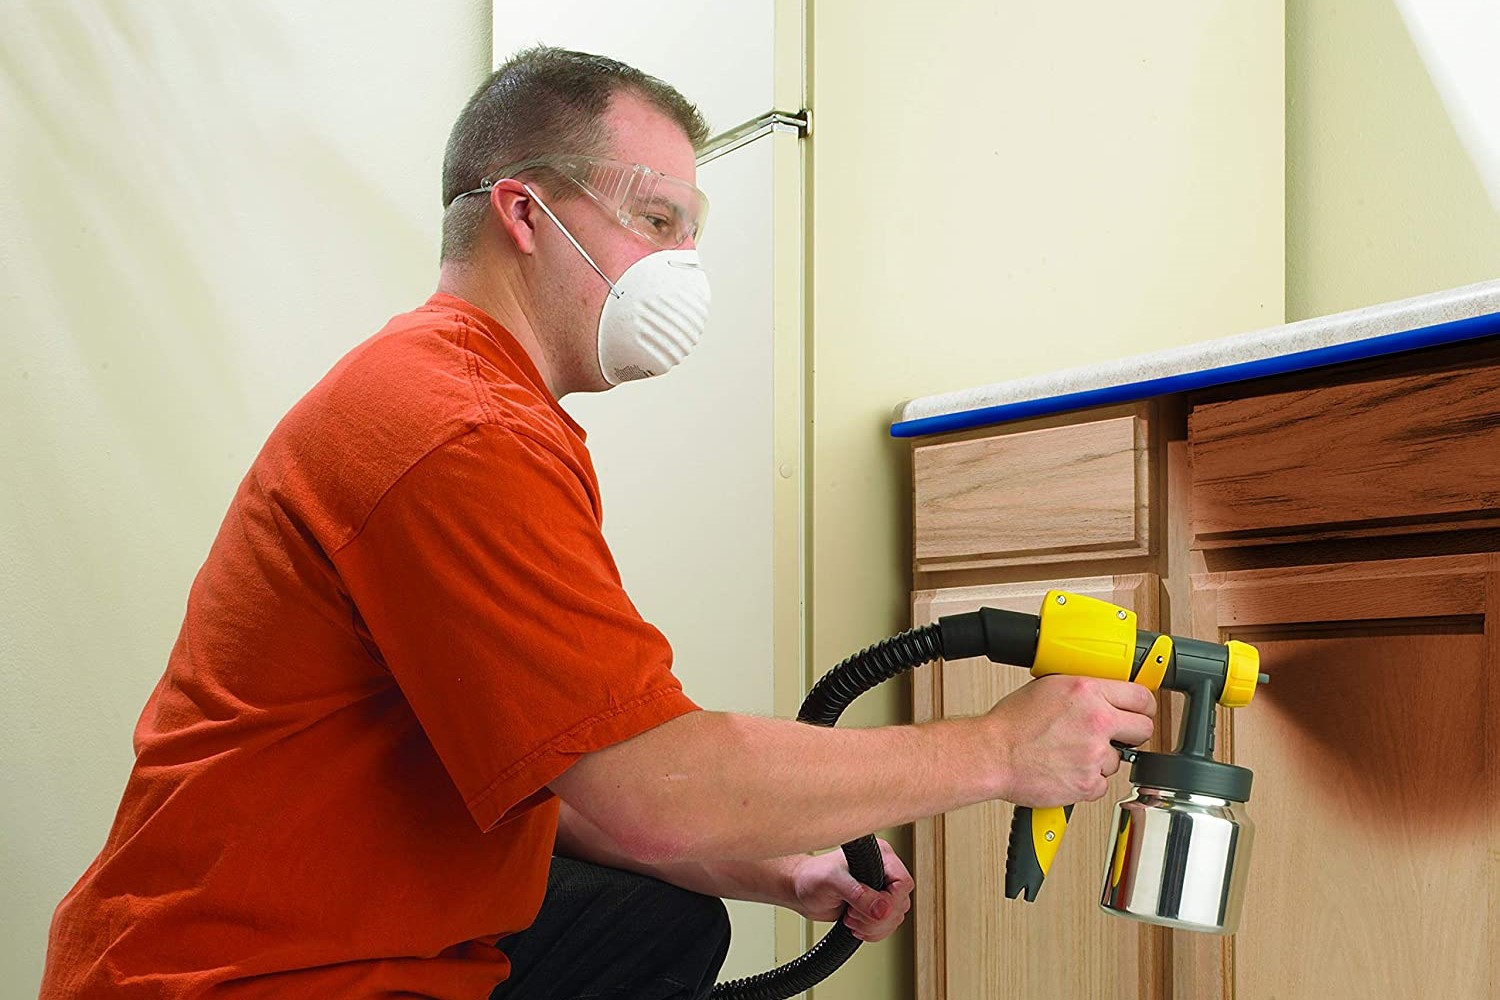 The Best Paint Sprayer for Cabinets on the Market